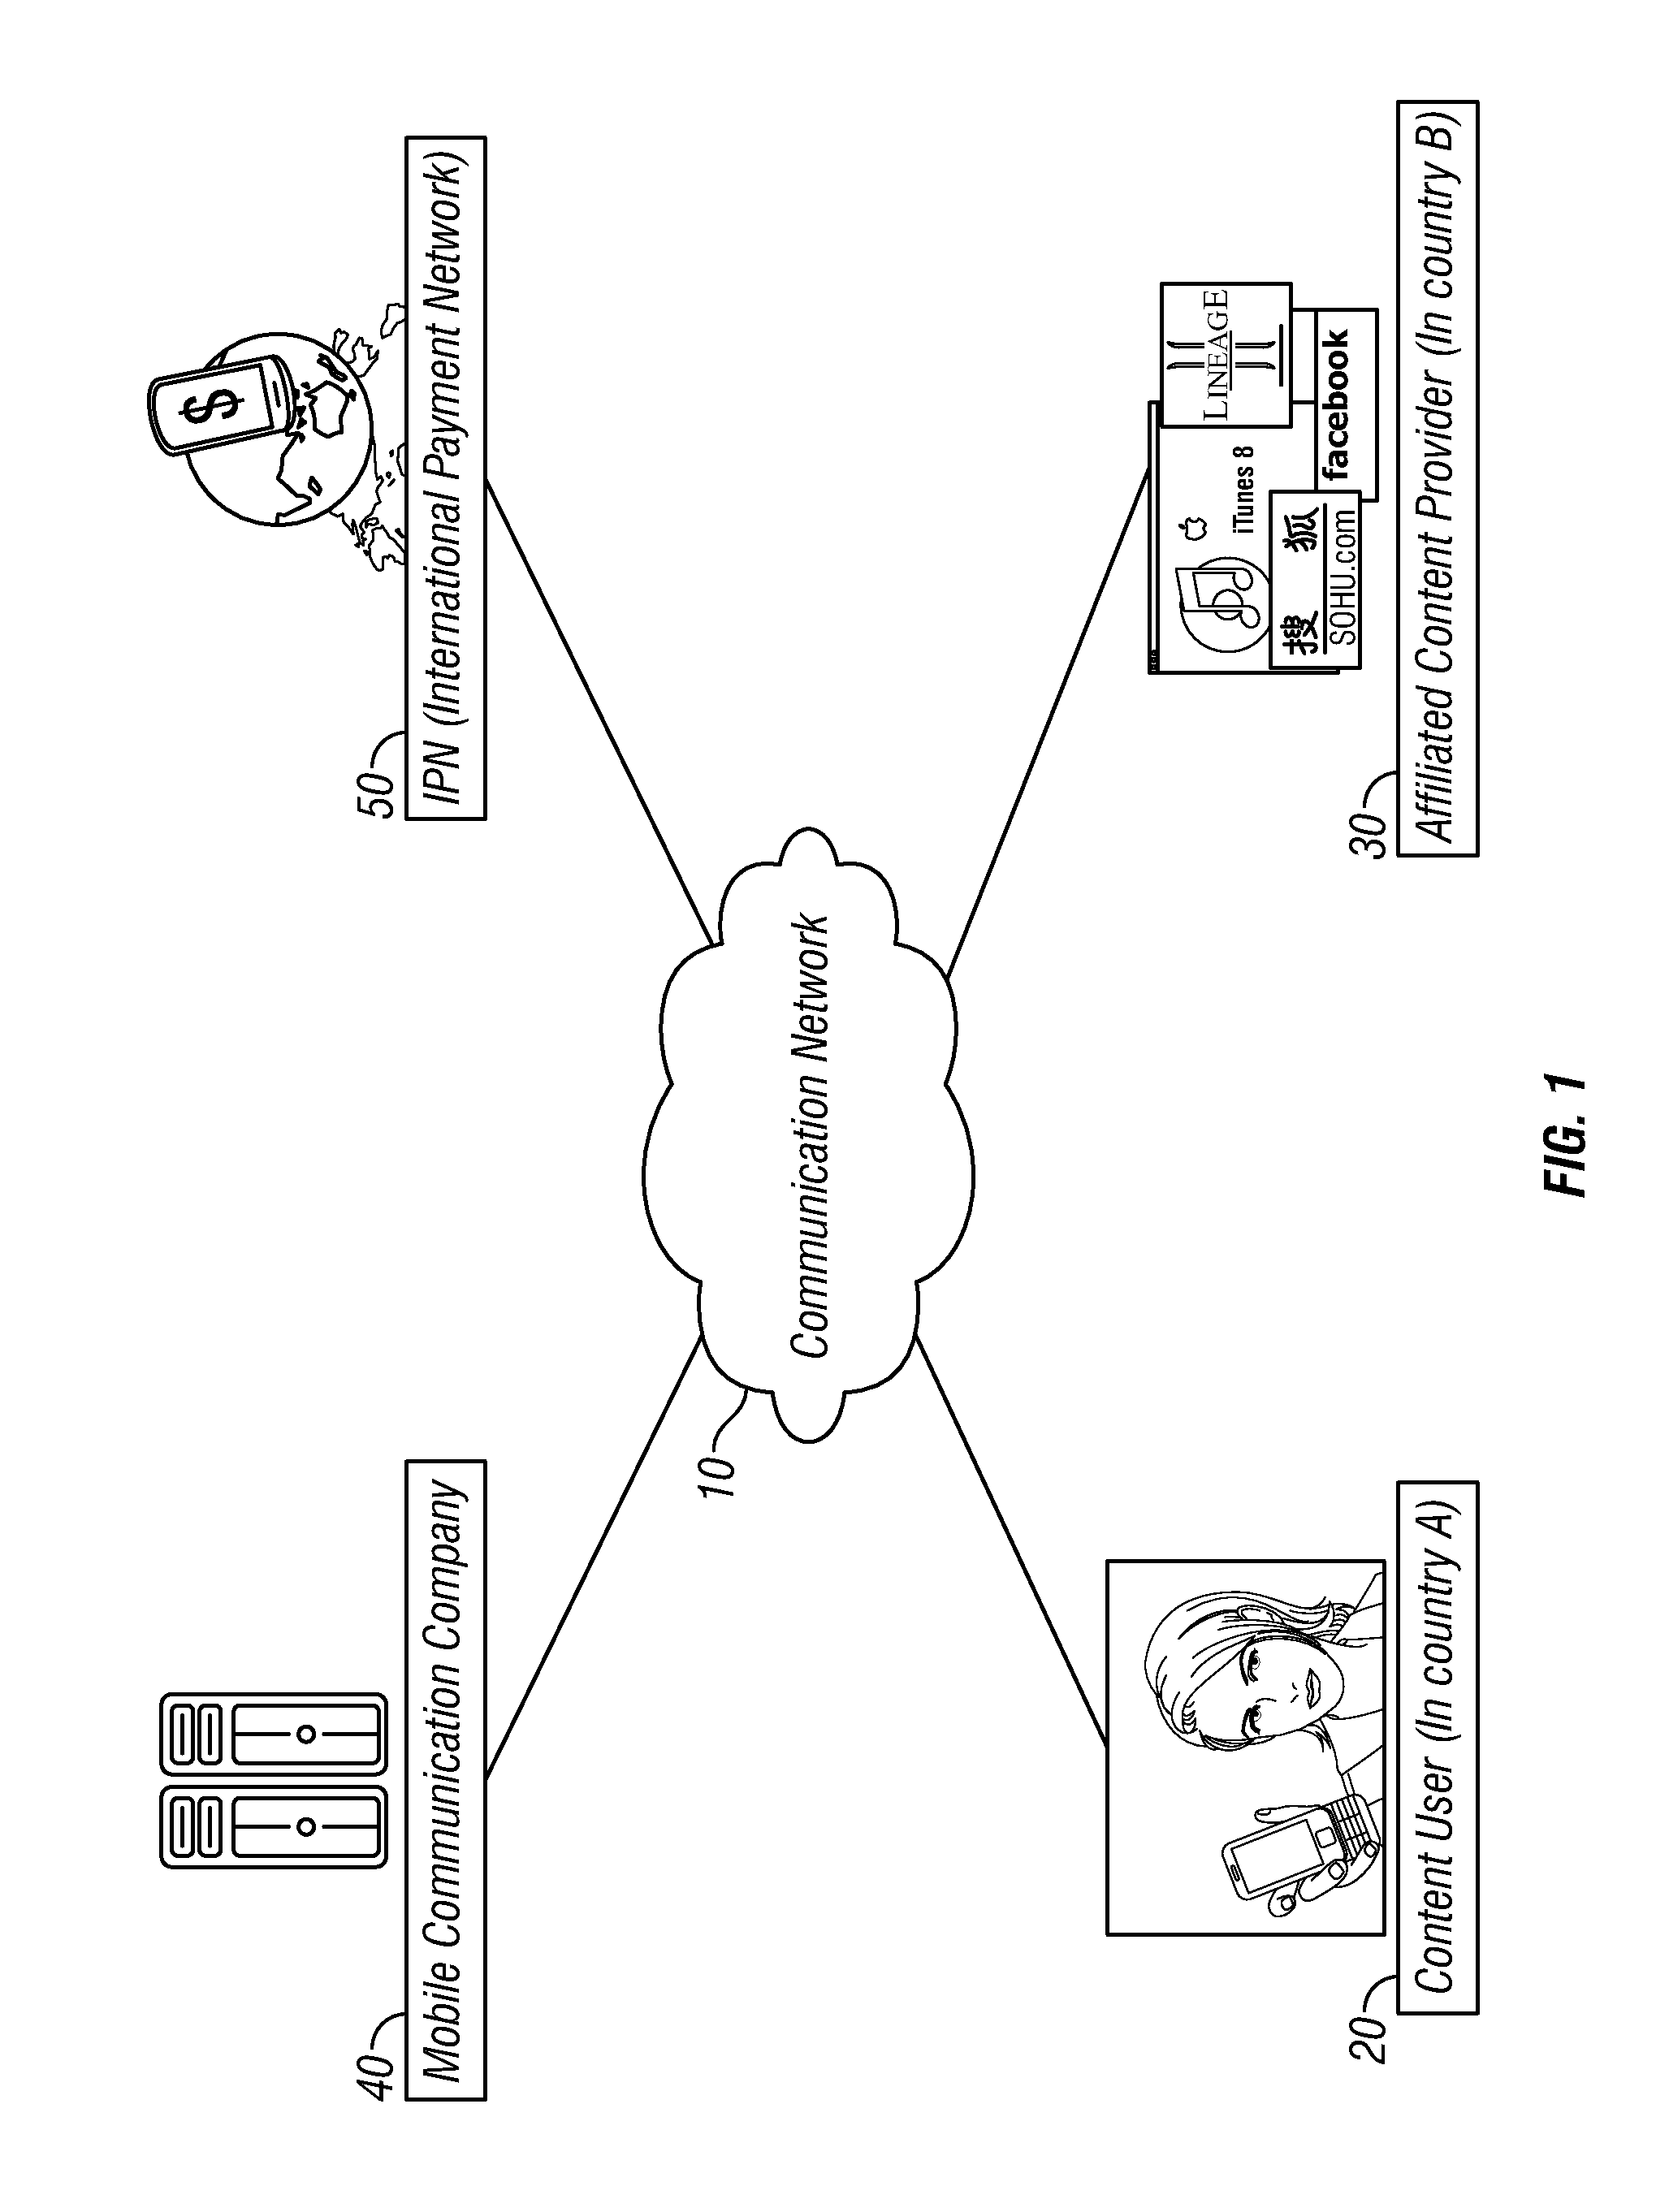 Method and System for Providing International Electronic Payment Service Using Mobile Phone Authentication